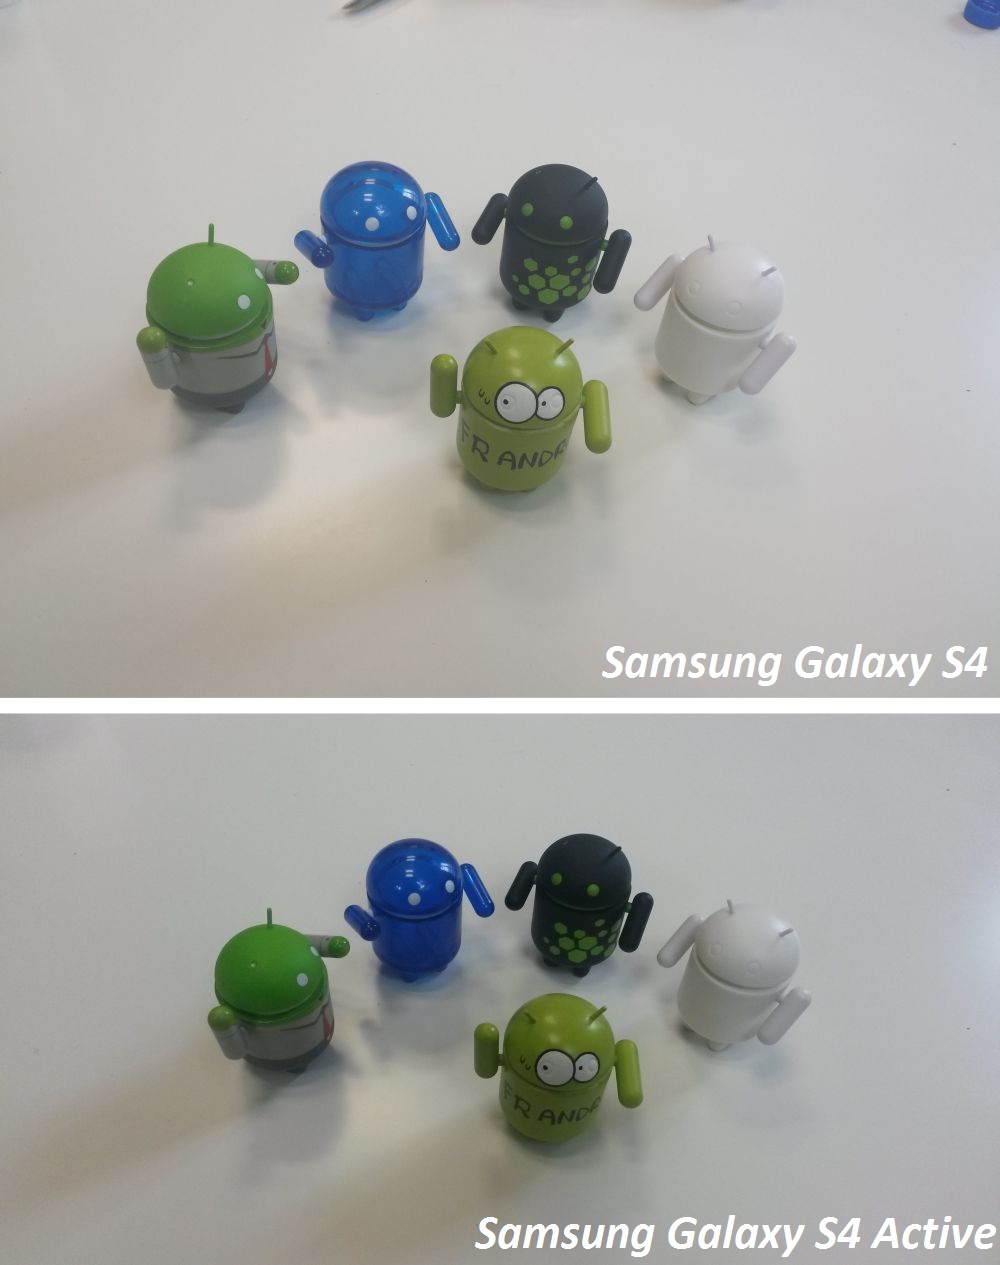 extrait-android-samsung-galaxy-s4-vs-samsung-galaxy-s4-active-test-photo-intérieur-1